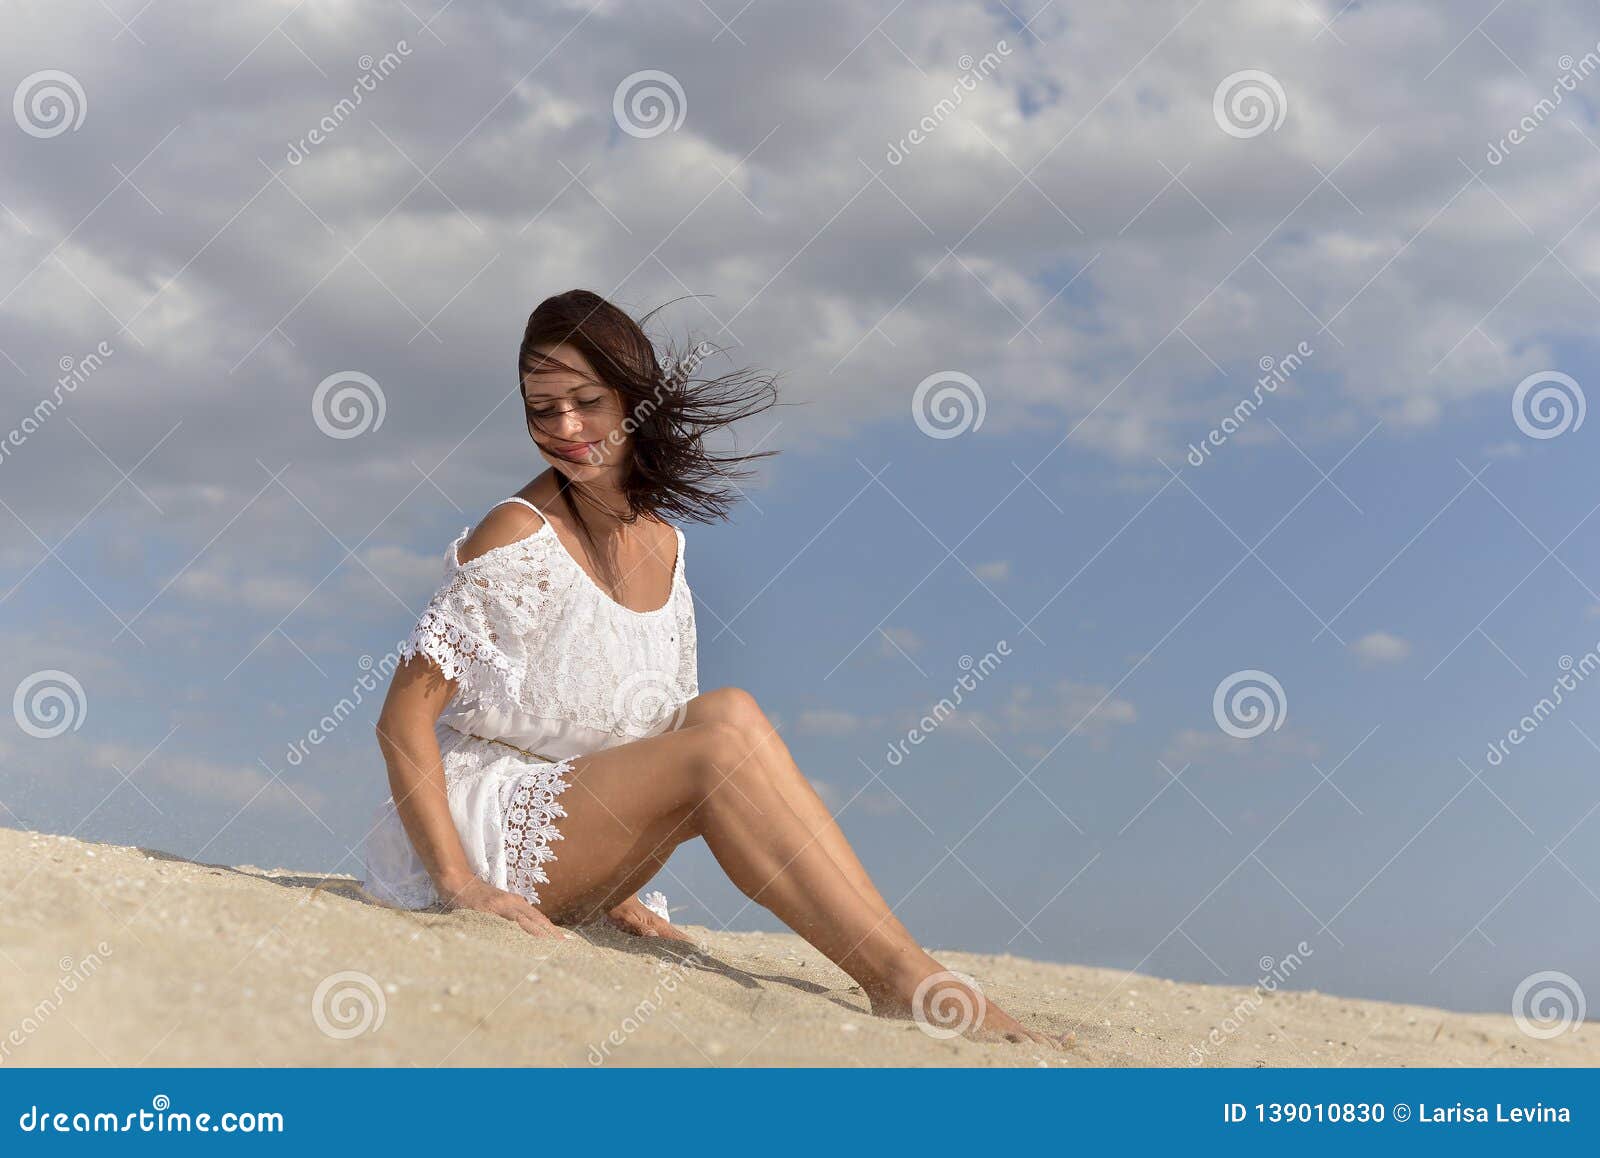 A Young Woman In A White Dress Sitting Barefoot On The Sandy Beach 